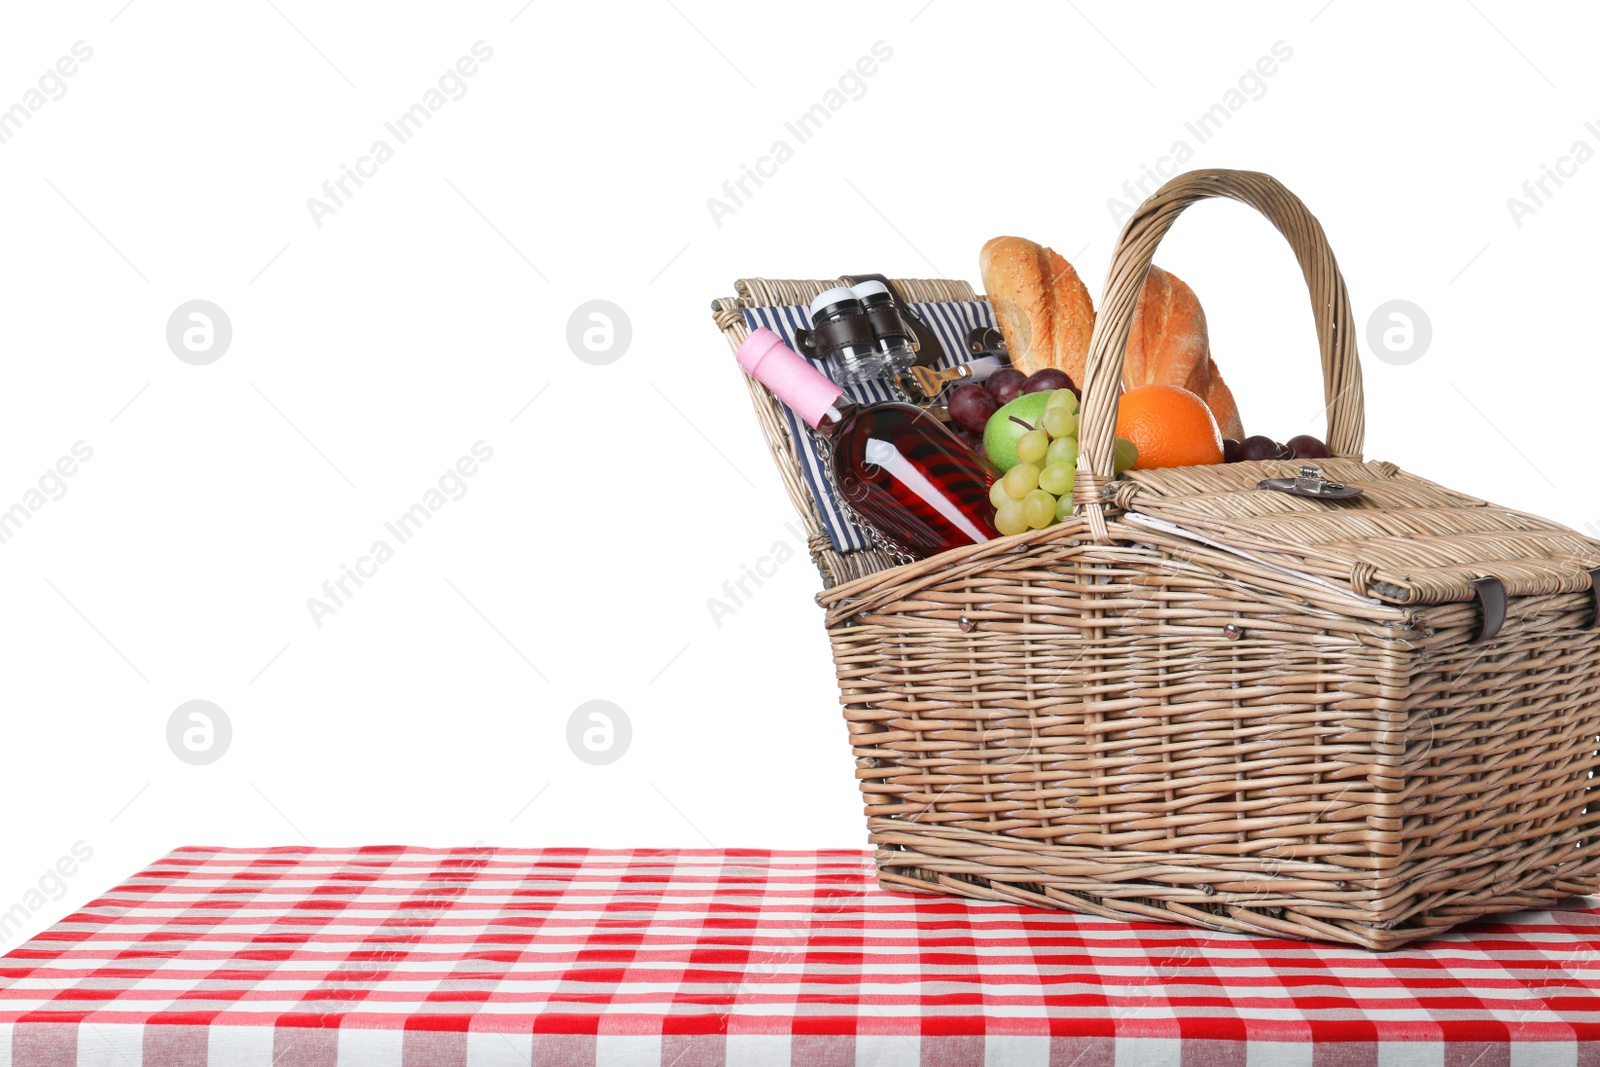 Photo of Wicker picnic basket with different products on checkered tablecloth against white background, space for text